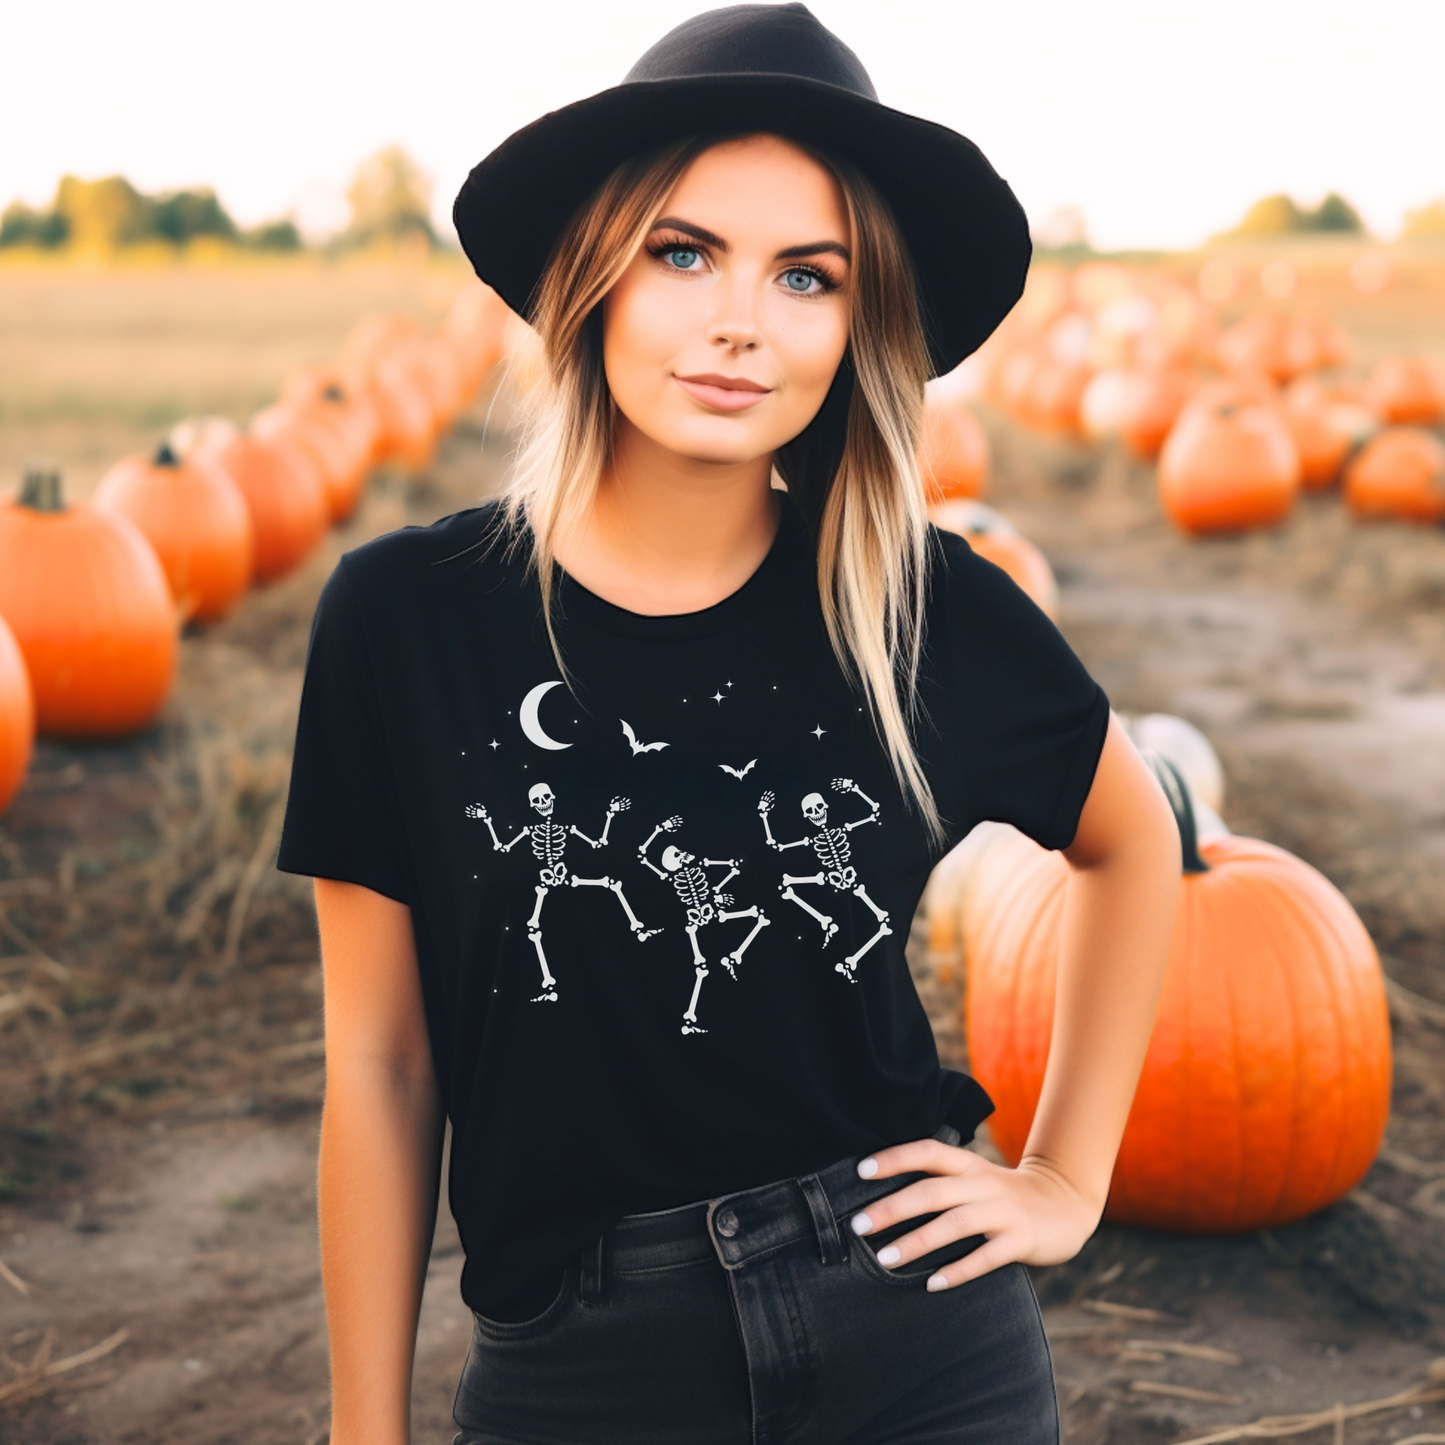 Woman wearing a black t-shirt with dancing skeletons